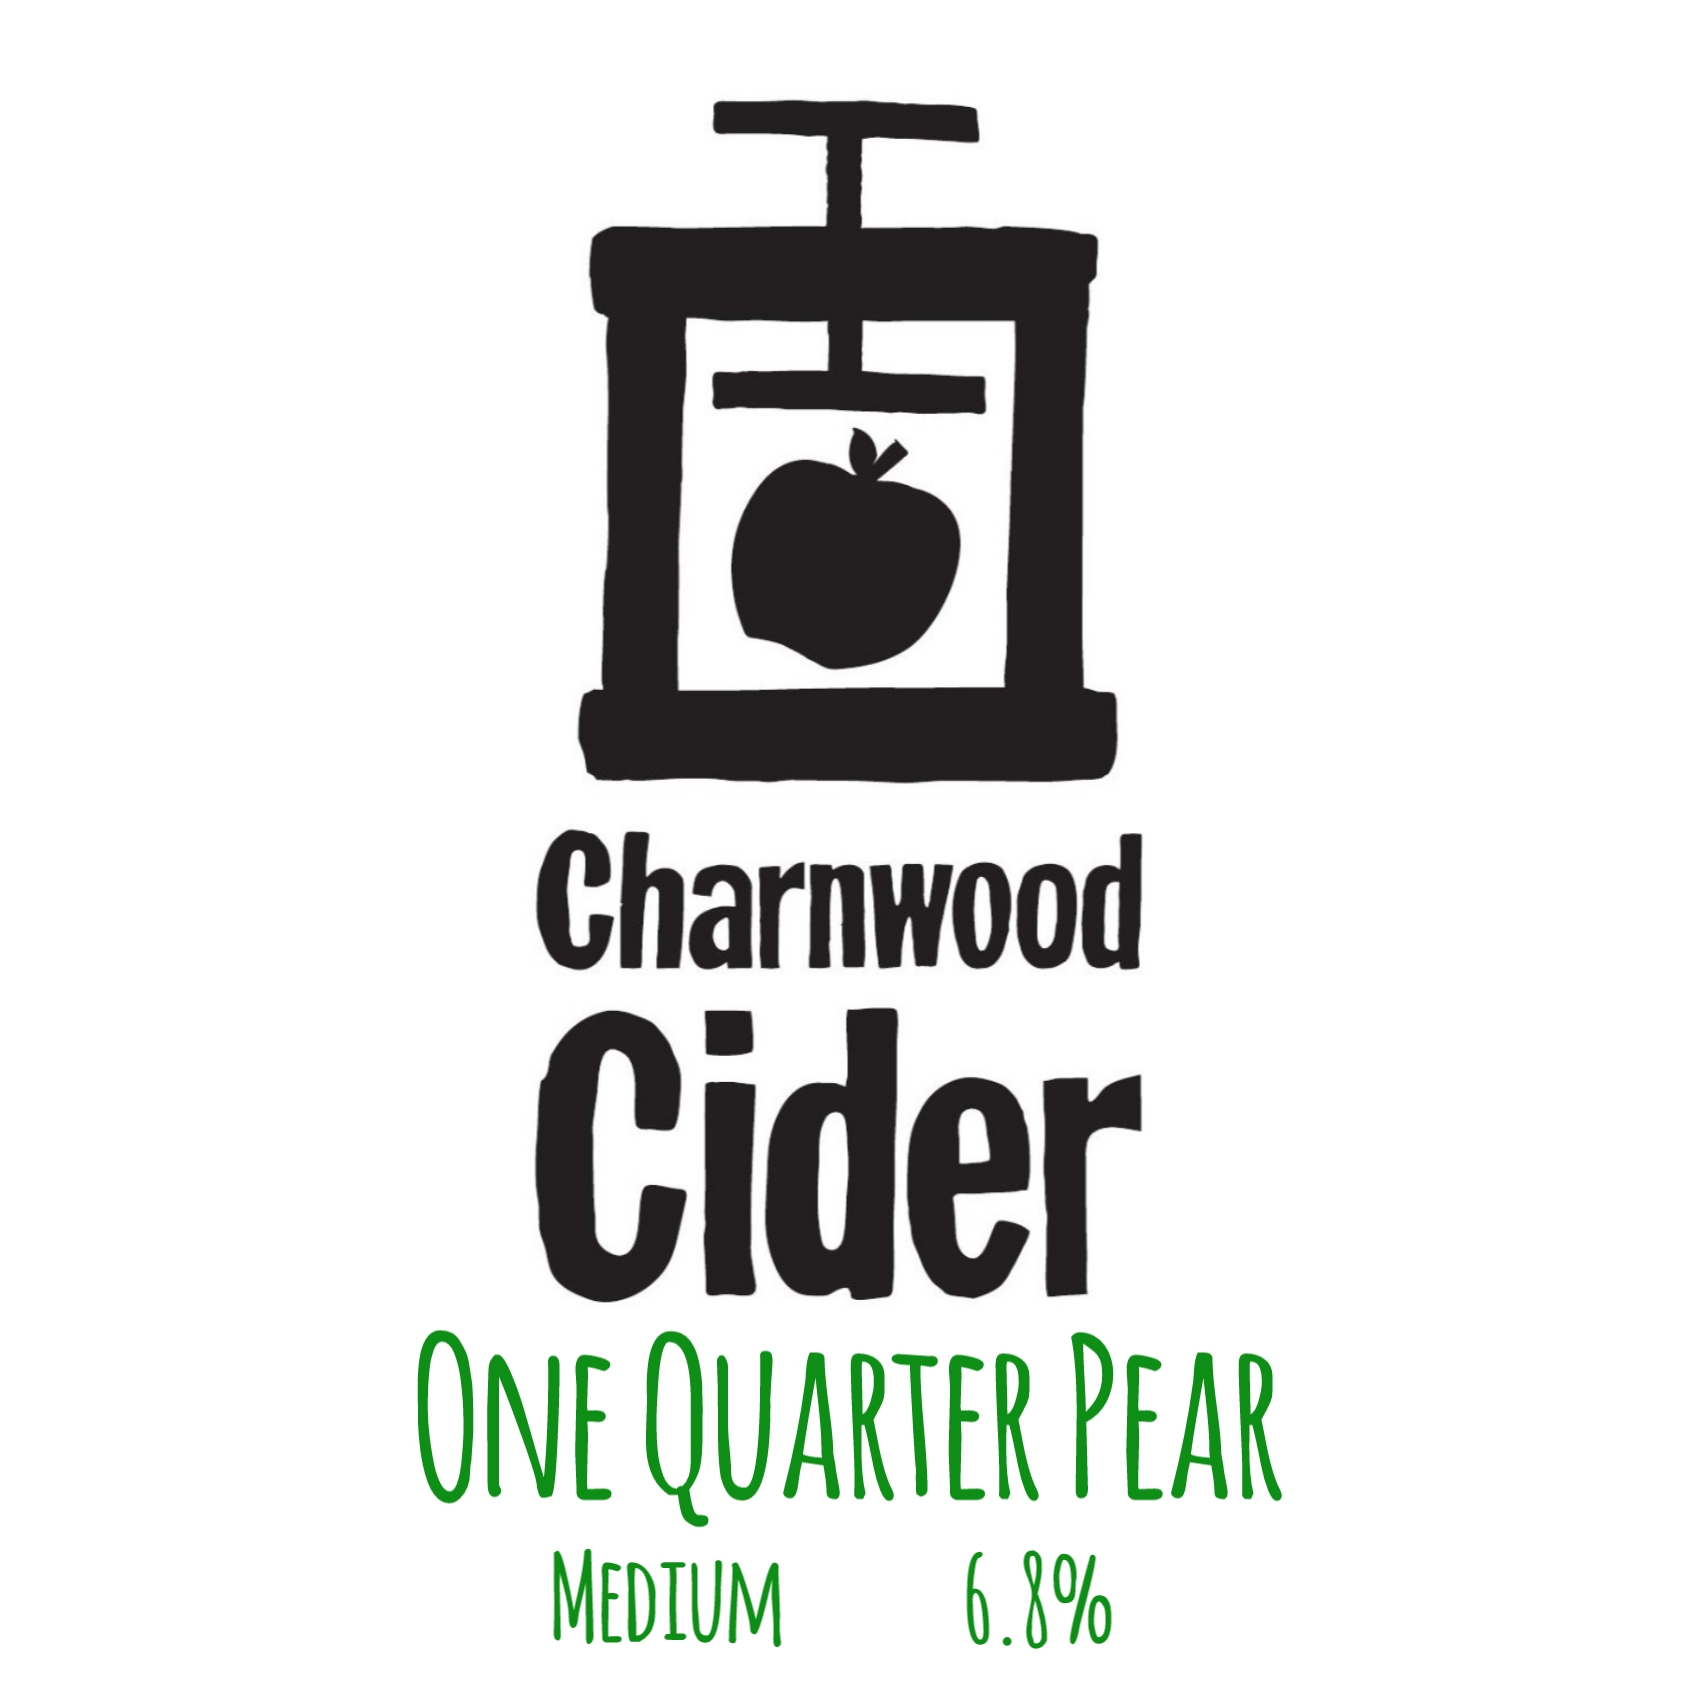 charnwood-one-quarter-pear.png